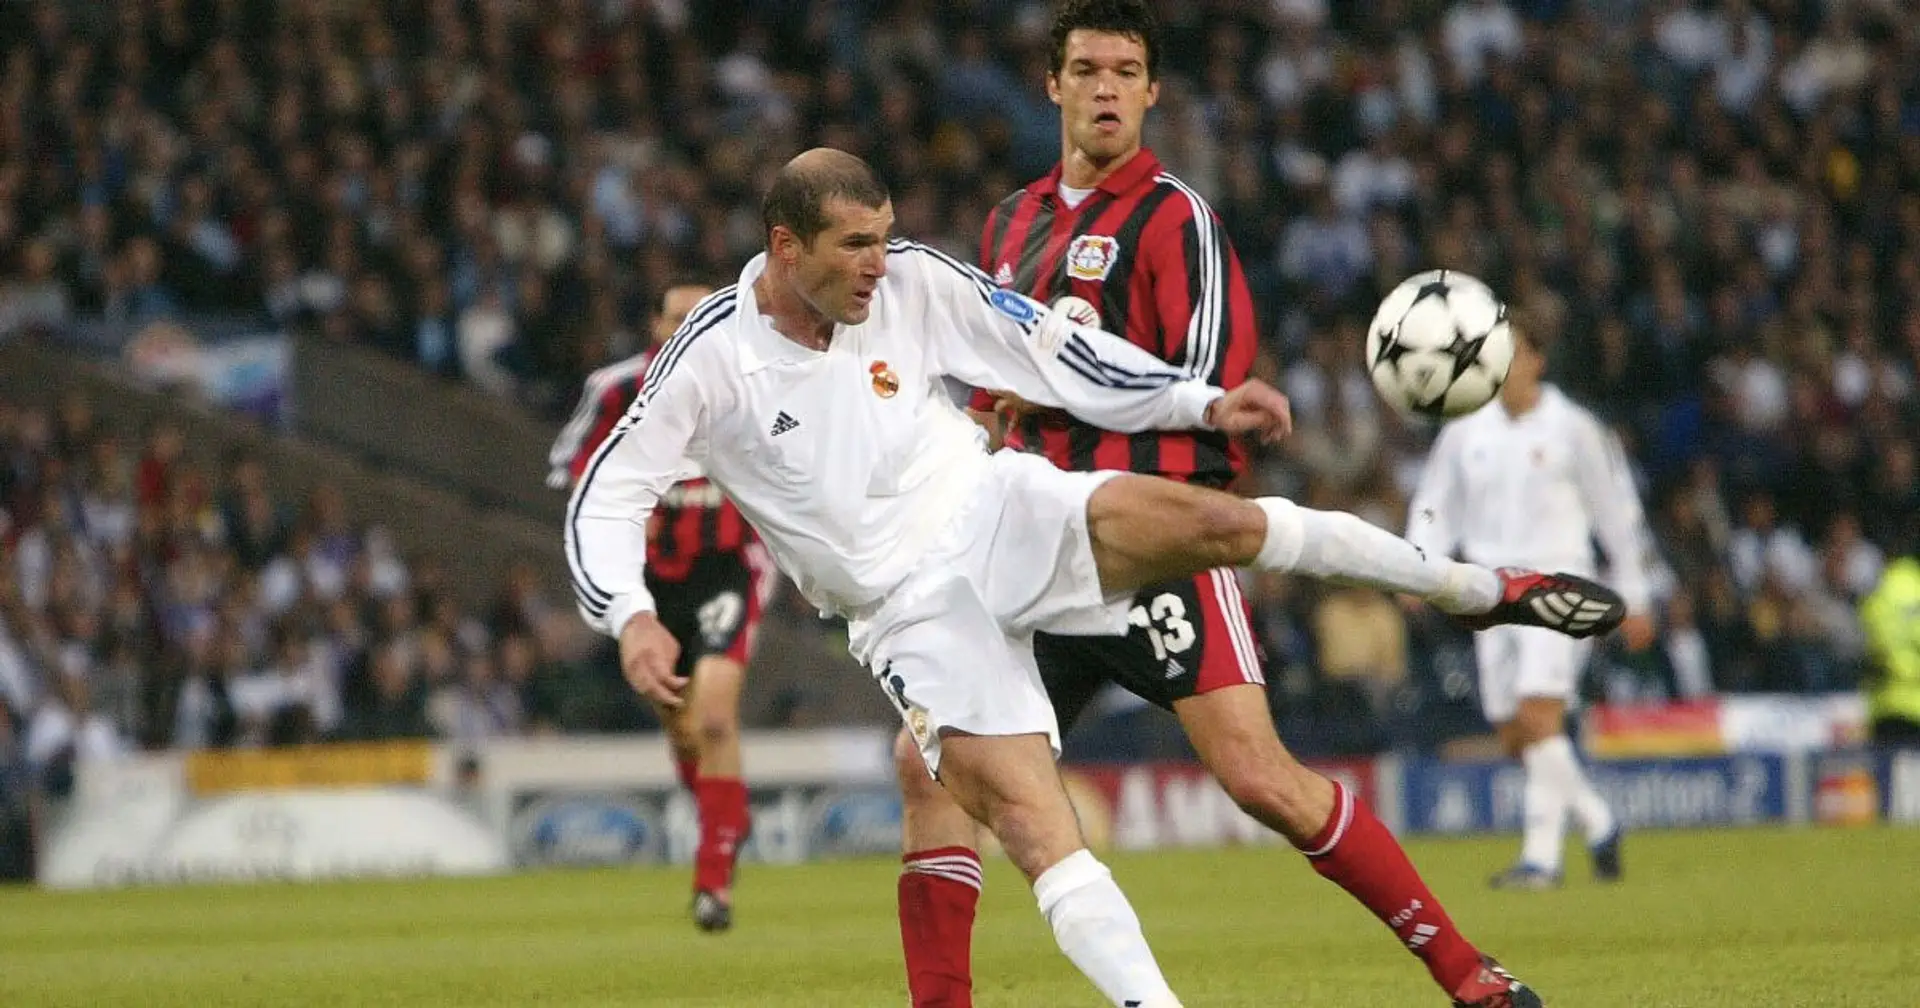 'People forget how frustrating Zidane was': Fans say Zizou is NOT France's GOAT